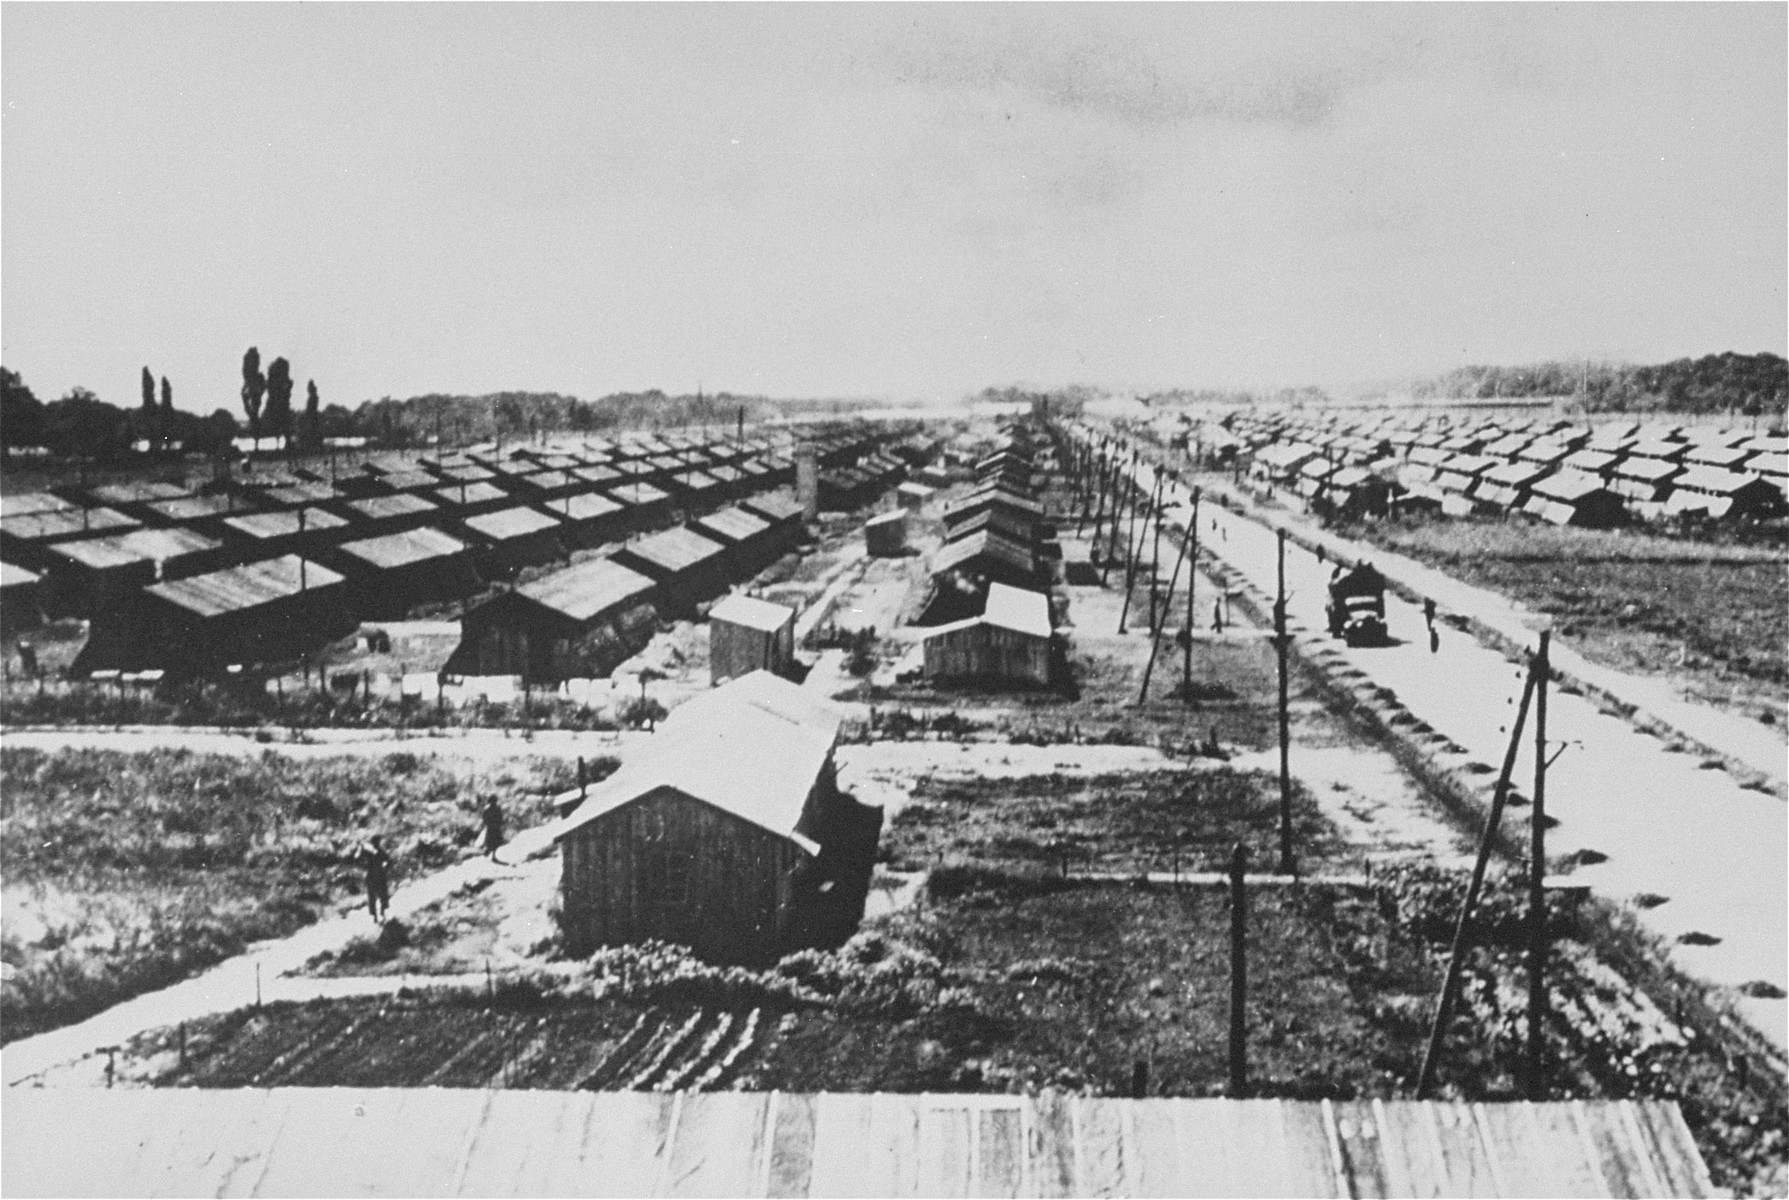 View of the Gurs transit camp from the camp water tower.